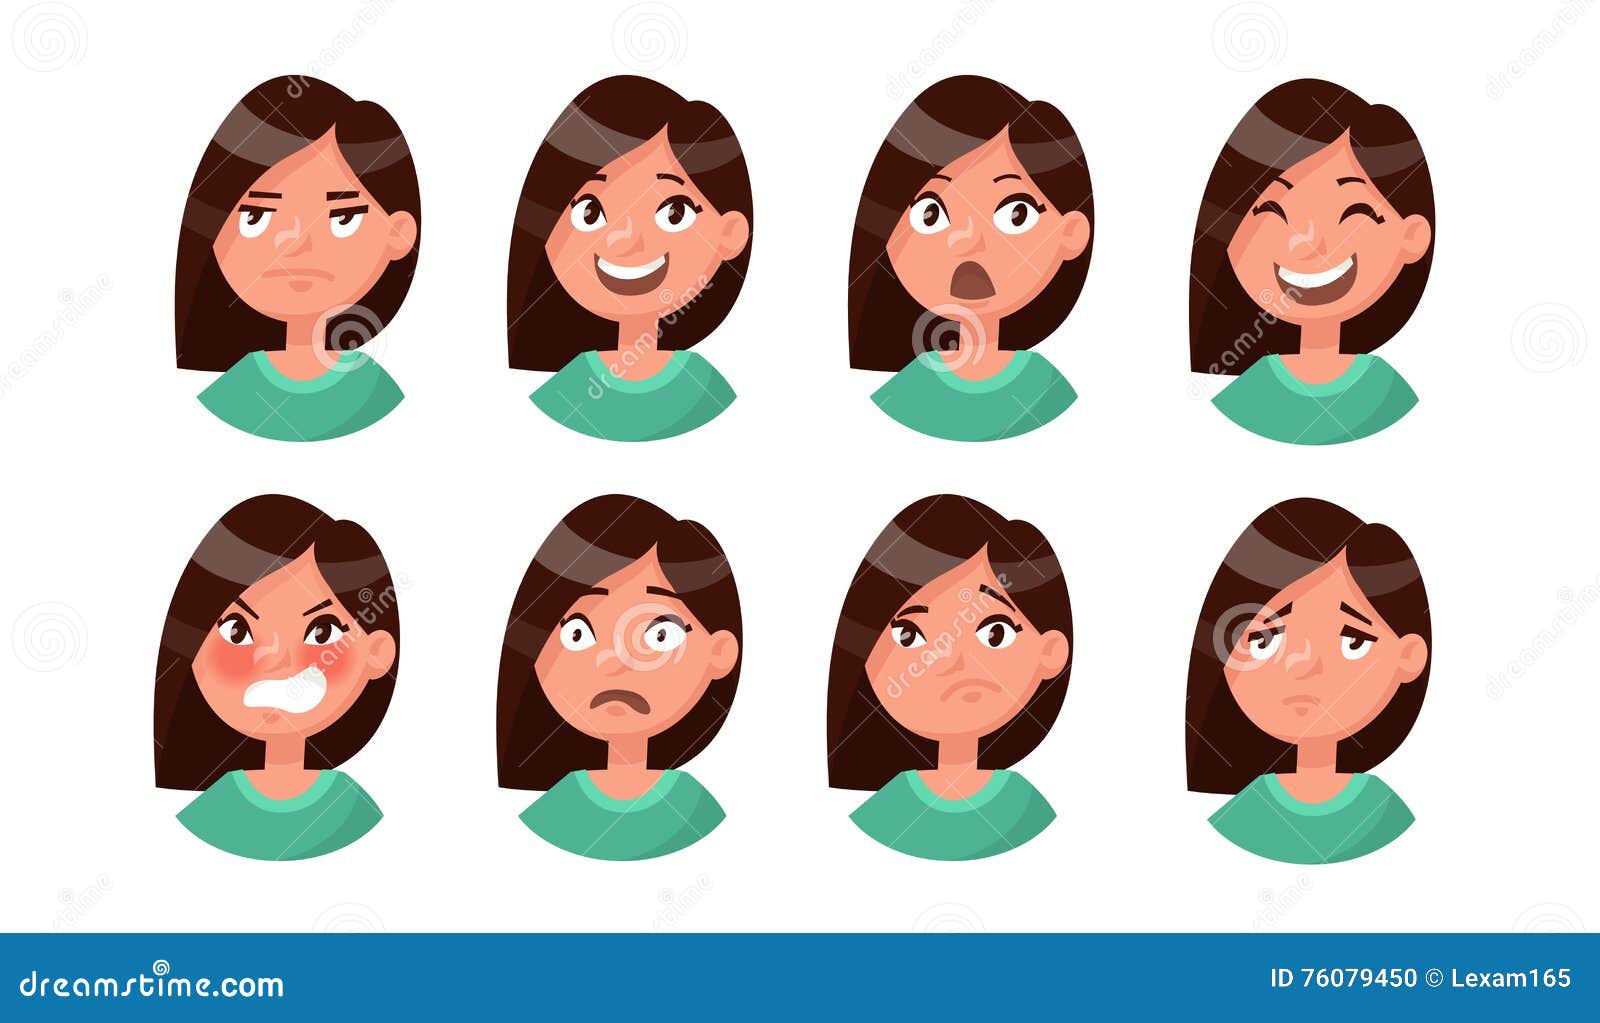 Character people avatar set face emotions Vector Image